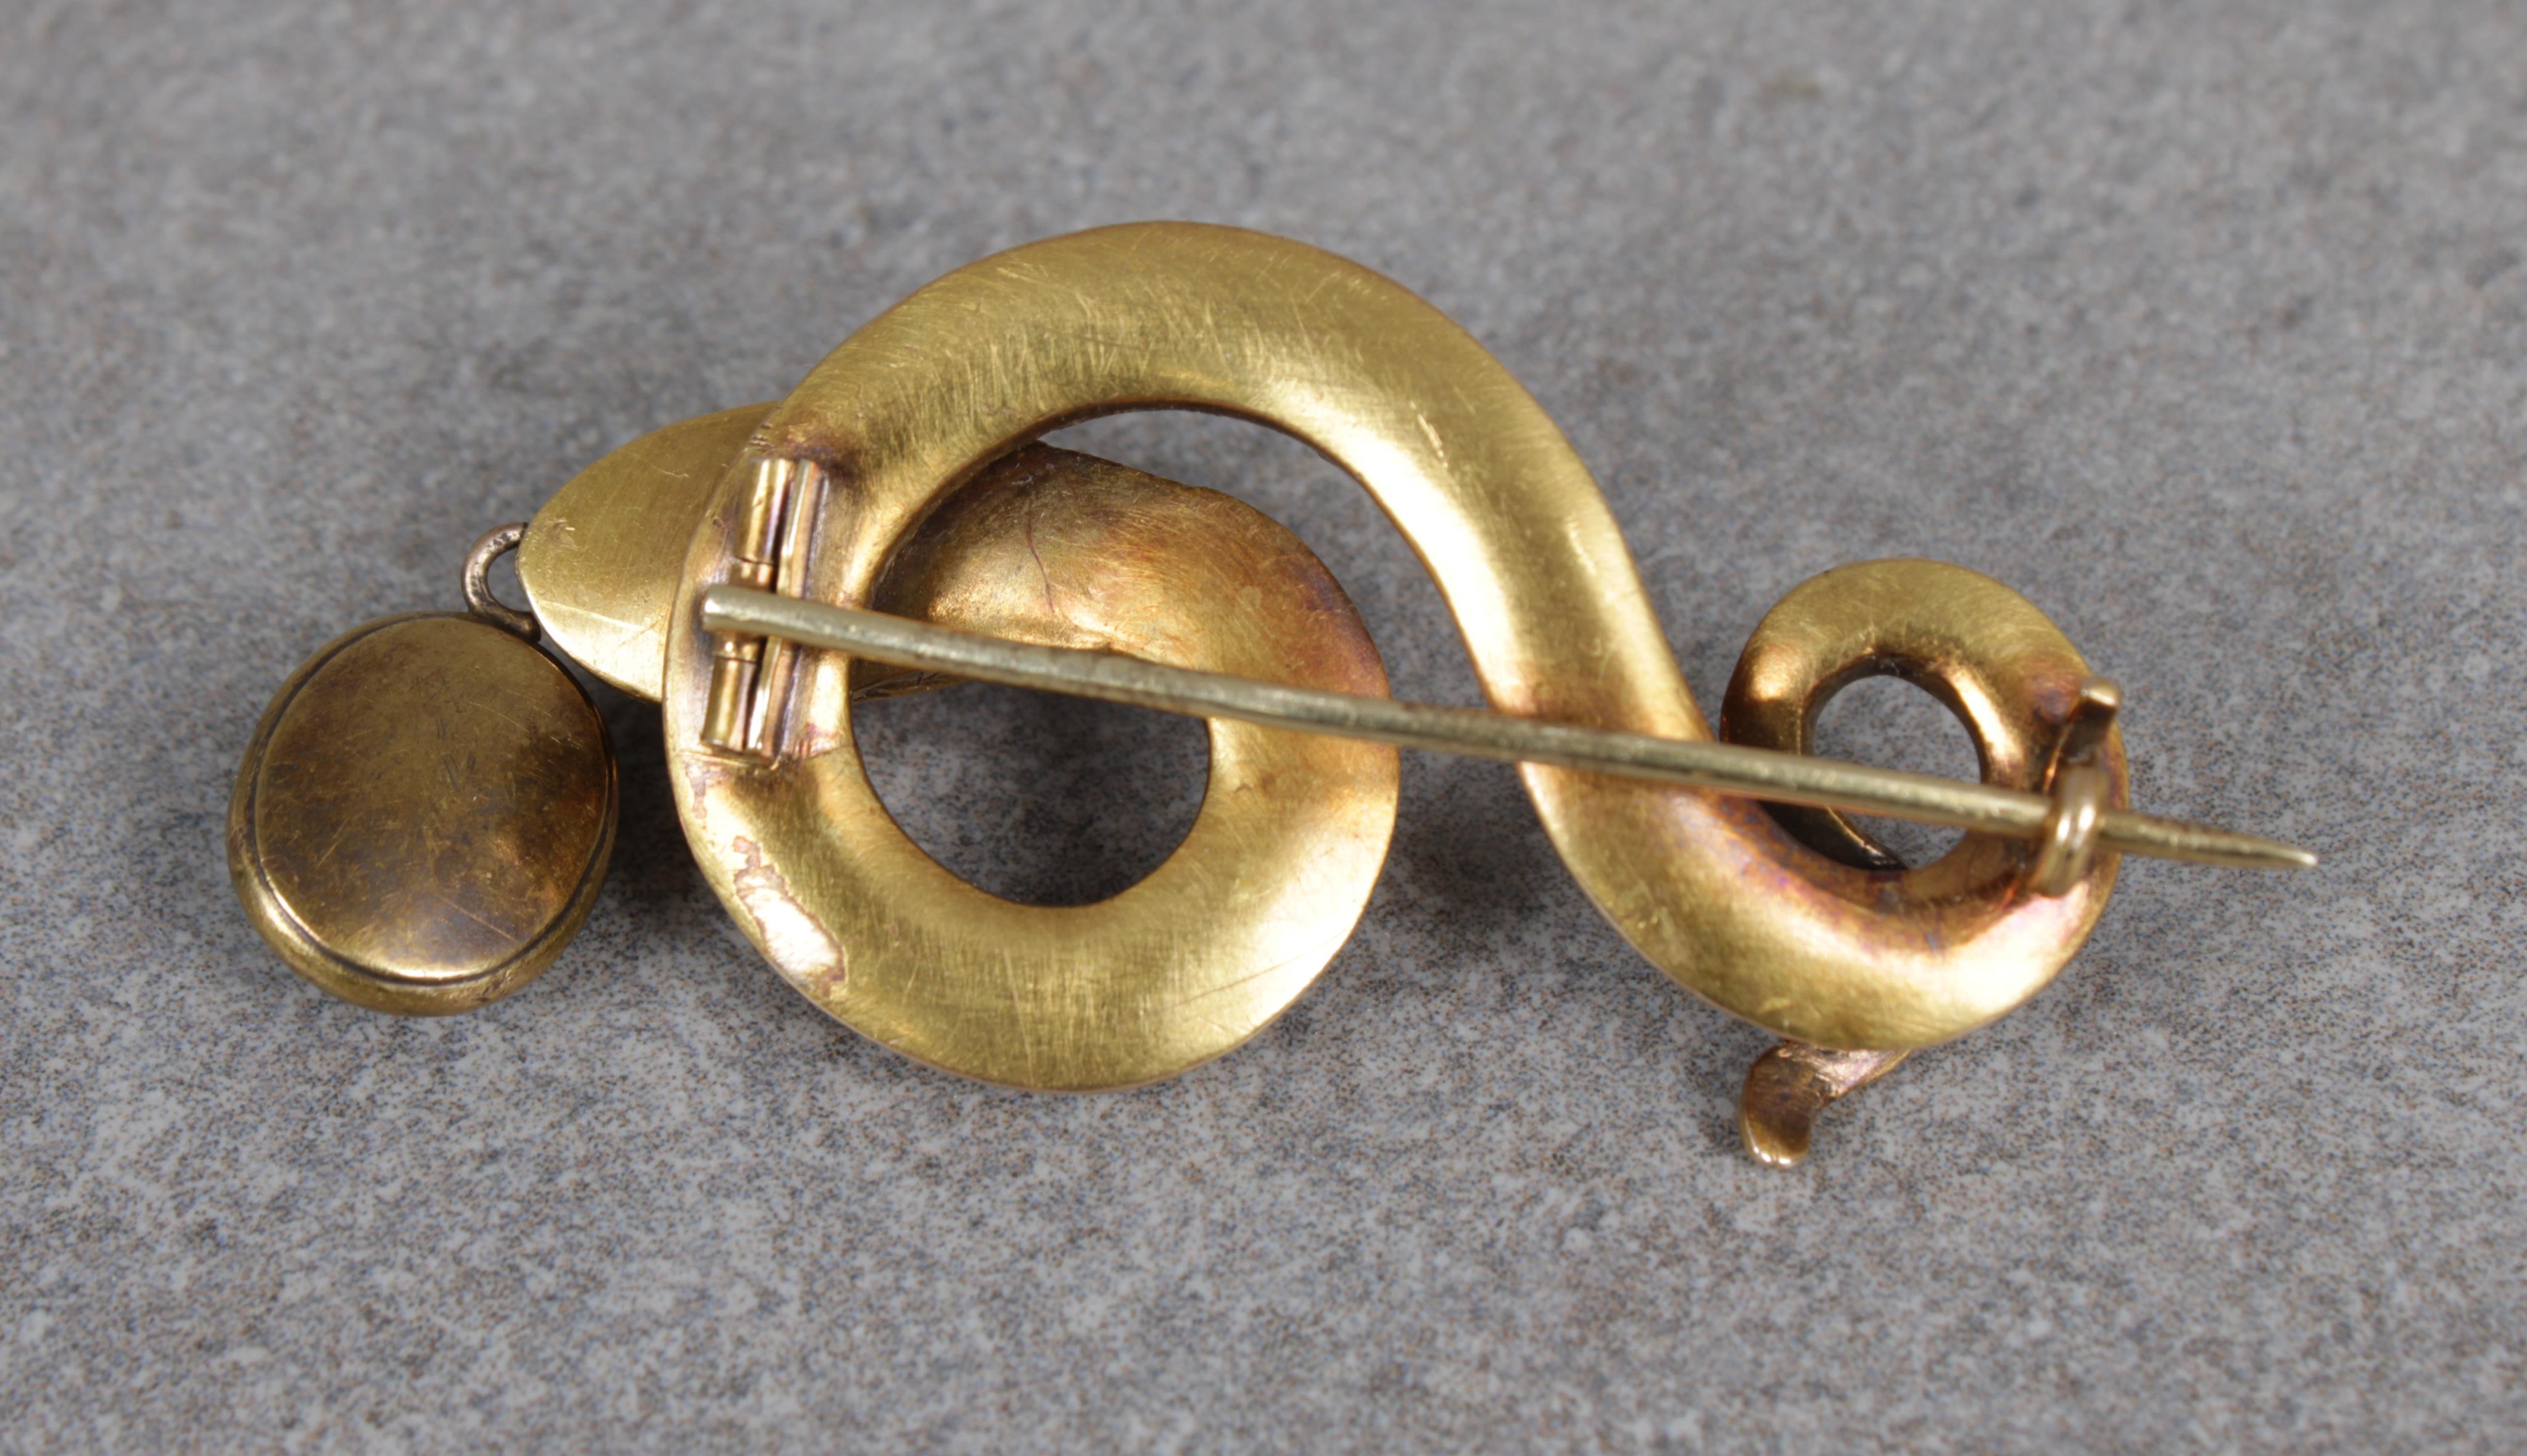 A gold serpent brooch - Image 3 of 3